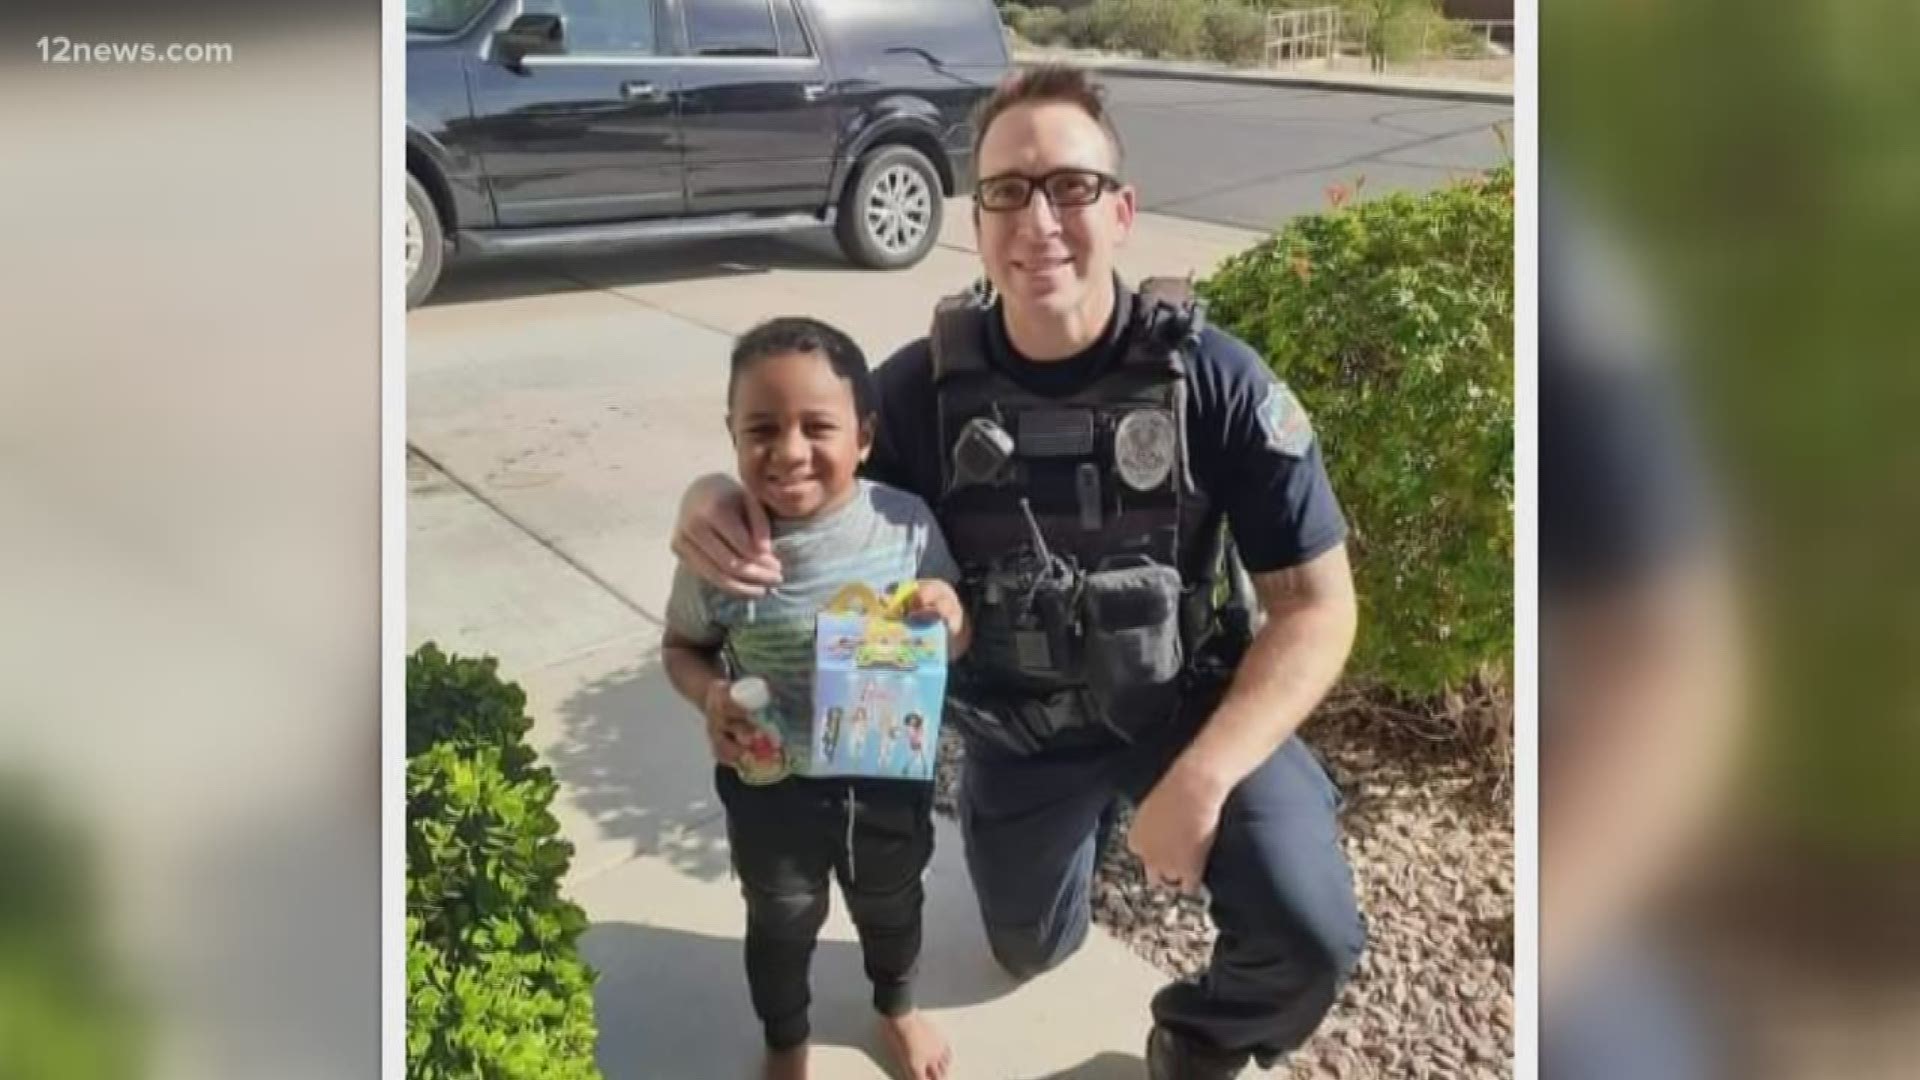 A 5-year-old Mesa boy who called 911 when he wanted McDonald's got a special treat from officers. Team 12's Erica Stapleton has the story.